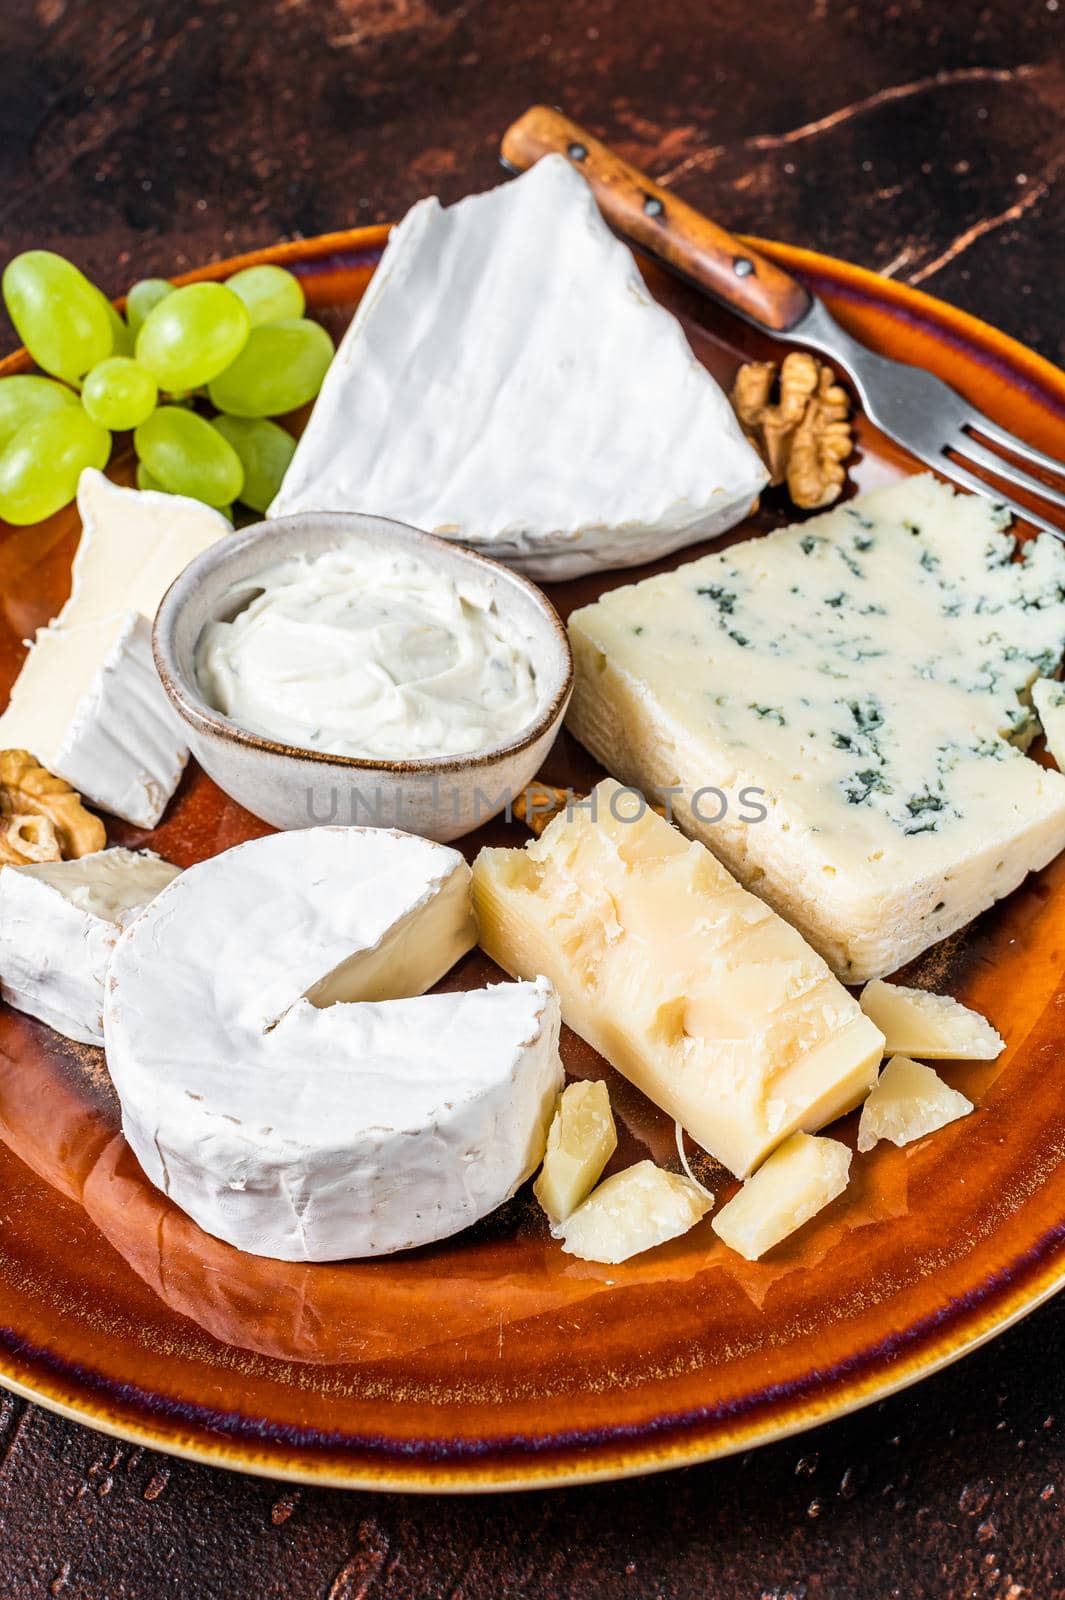 Cheese plate with Brie, Camembert, Roquefort, blue cream cheese, grape and nuts. Dark background. Top view by Composter